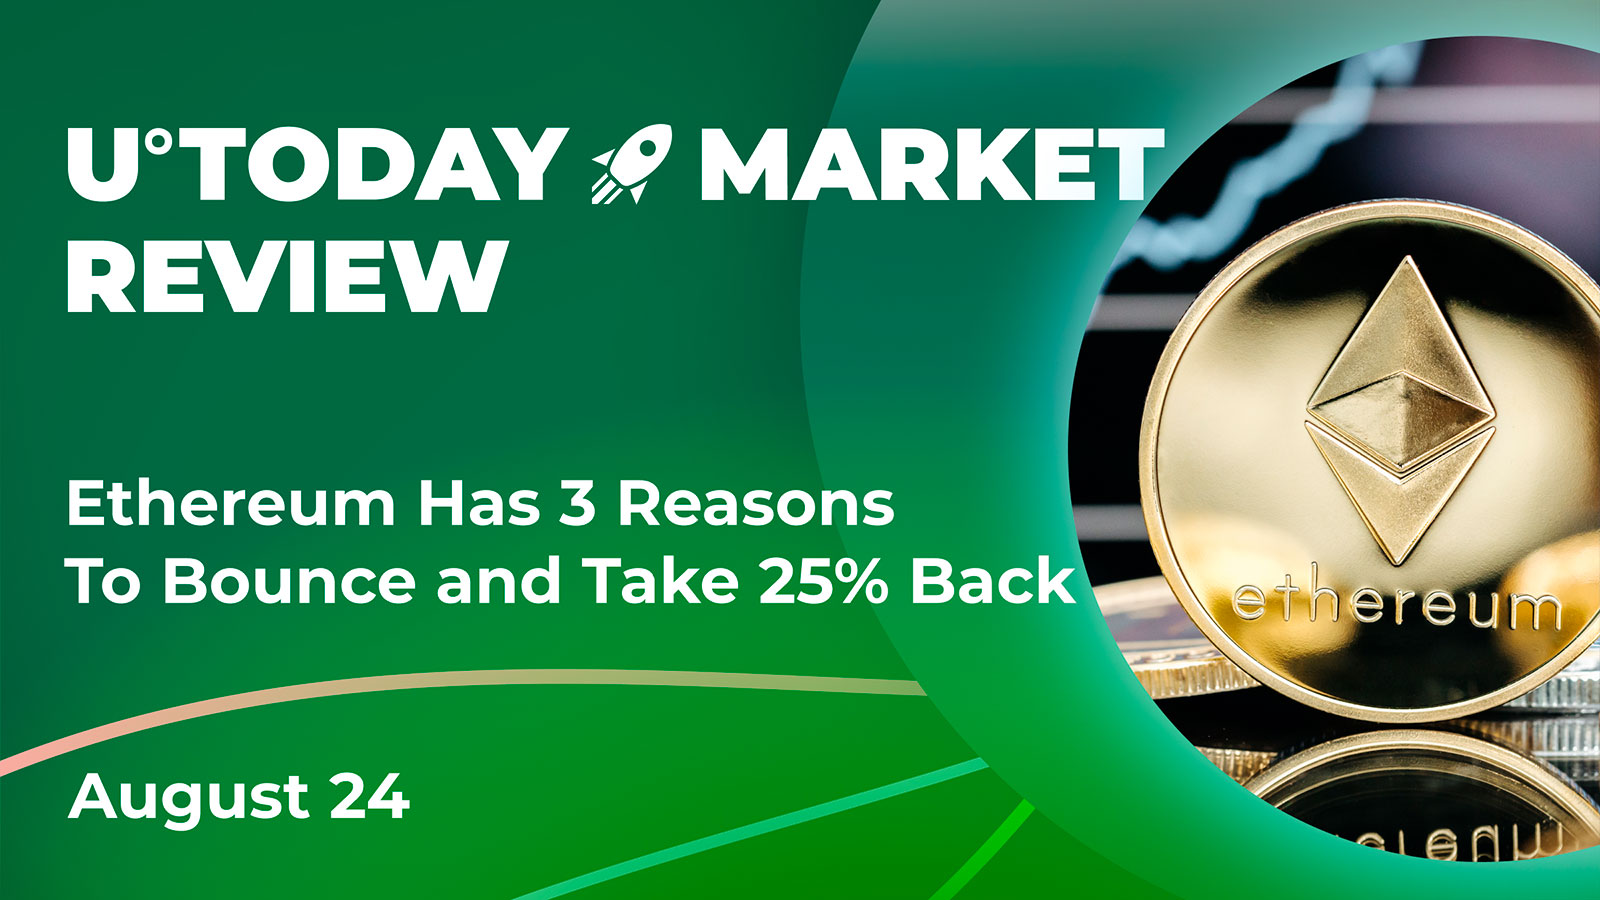 Ethereum Has 3 Reasons To Bounce and Take 25% Back: Crypto market Review, August 24